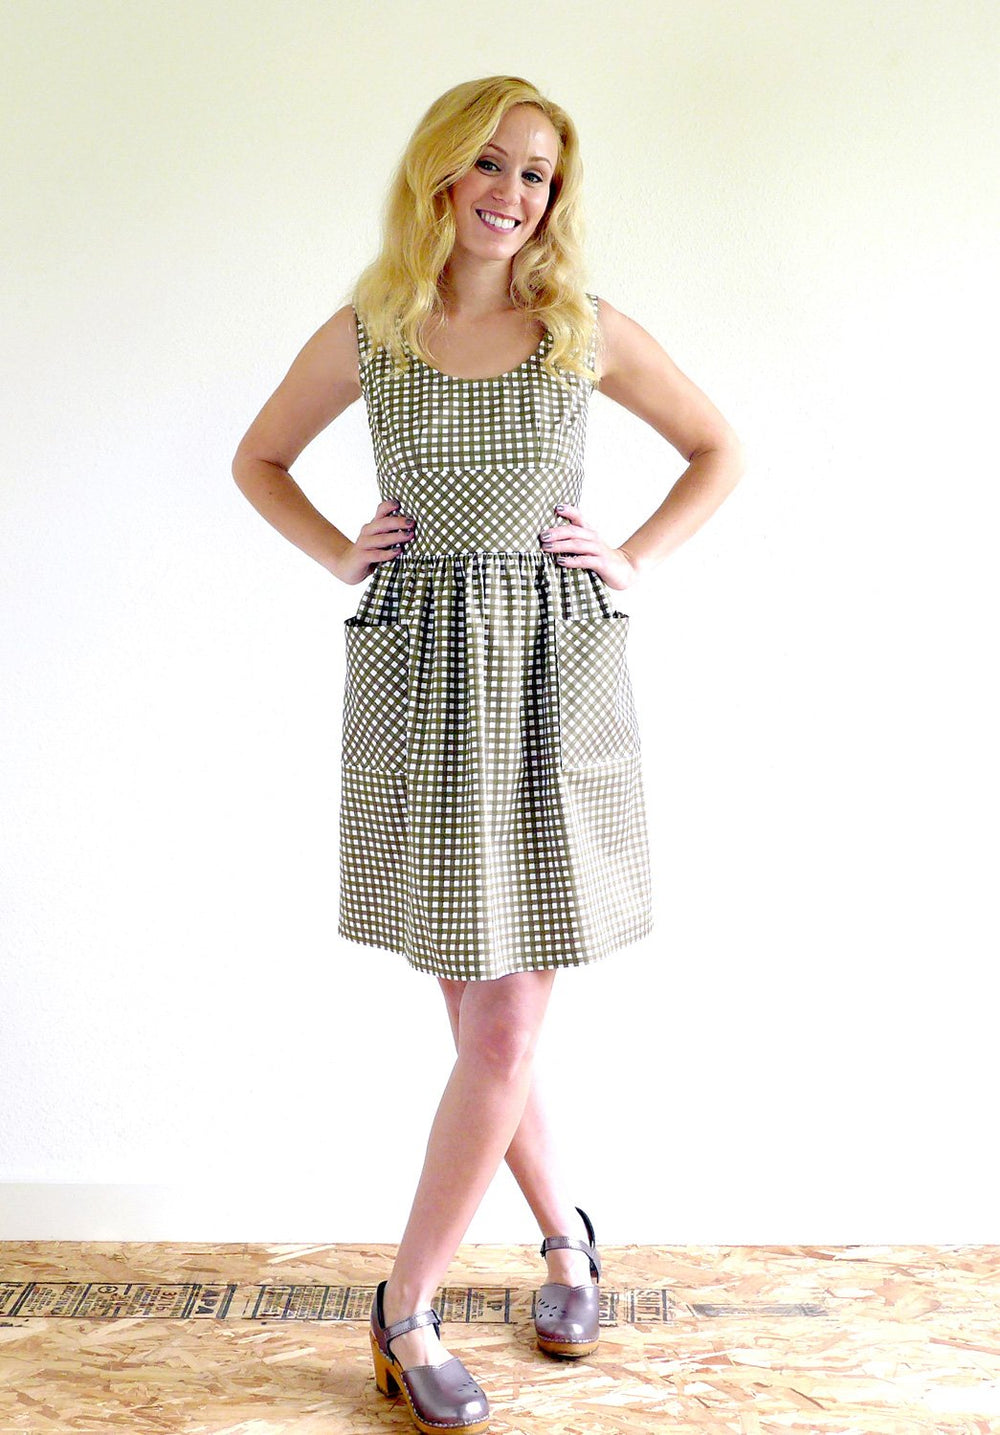 Woman wearing the Sylvie Dress sewing pattern from Christine Haynes on The Fold Line. A sleeveless dress pattern made in linen, lawn, shirting, or chambray fabrics, featuring a fit-and-flare style, darts under the bust, back waist darts, bias-bound neckli